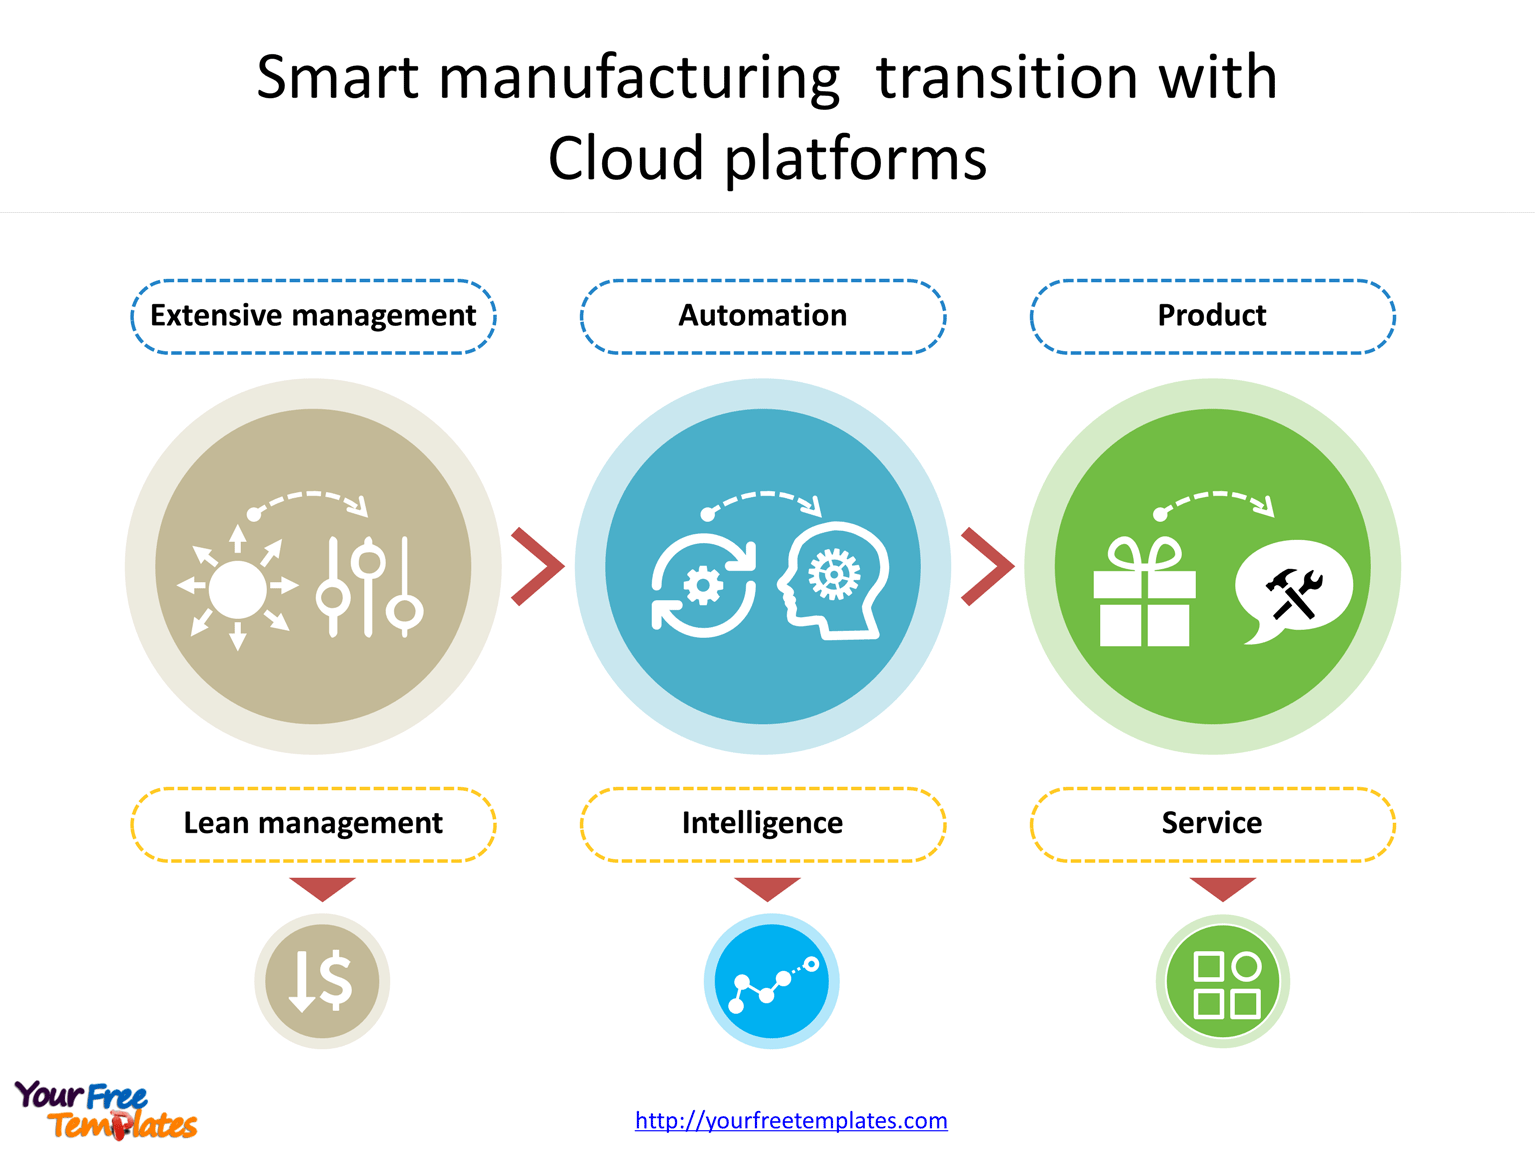 Smart manufacturing transformations with Cloud platforms